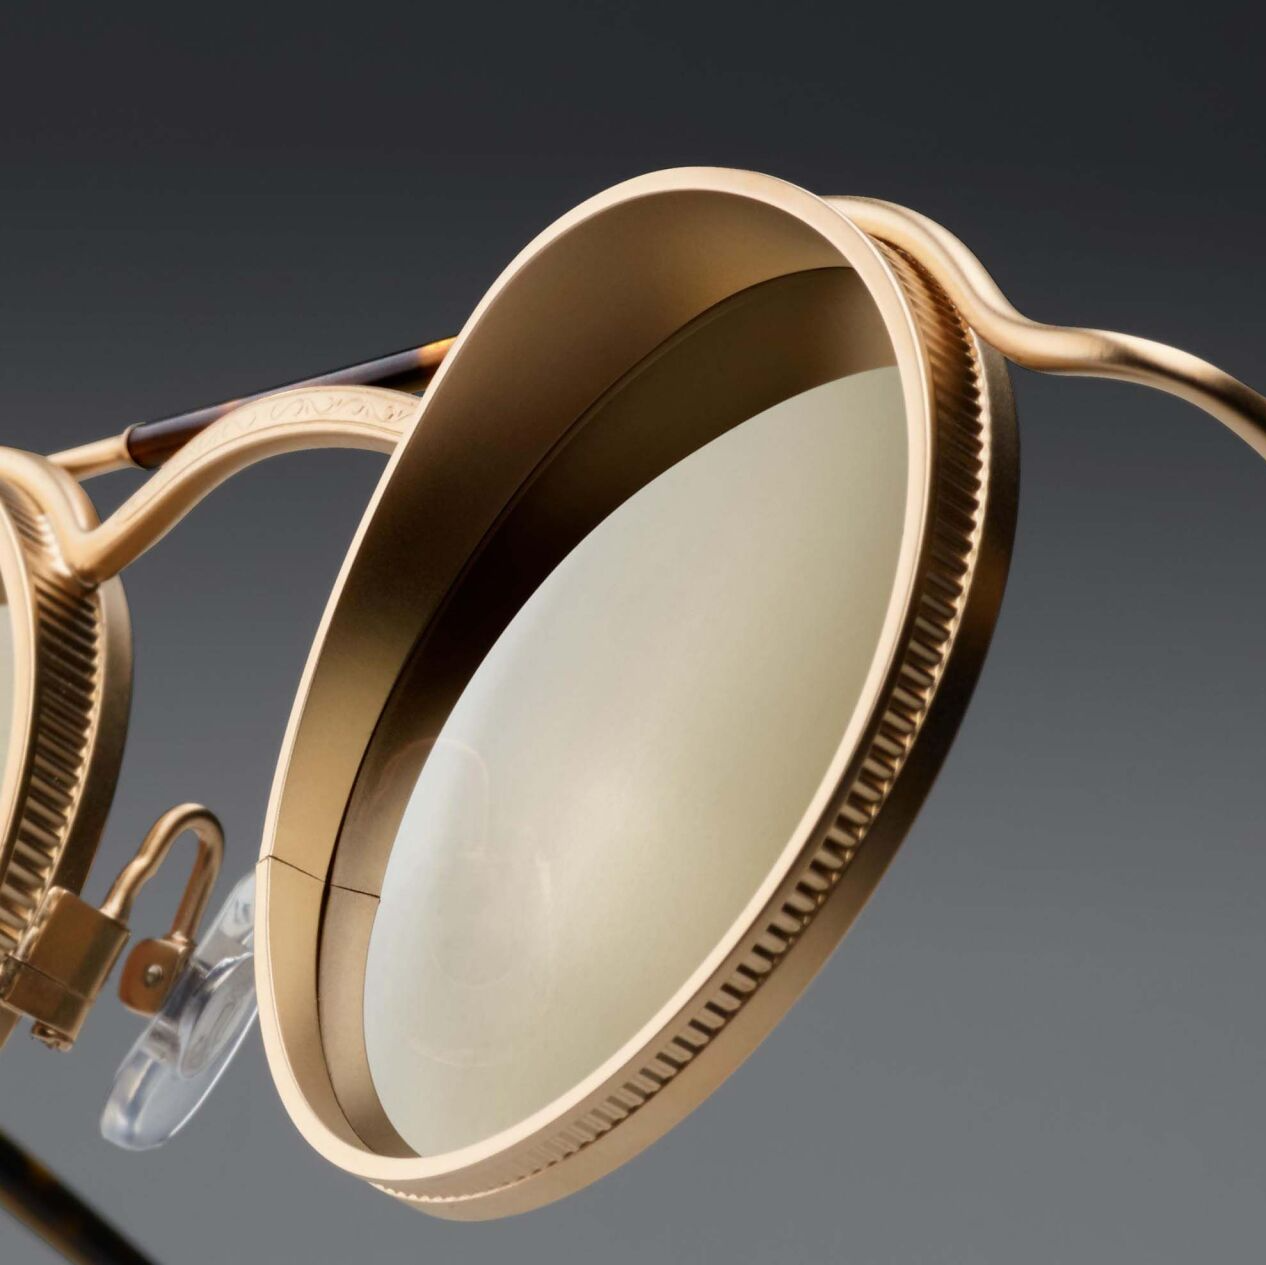 Matsuda sunglasses in gold metal with gold mirror tint lenses